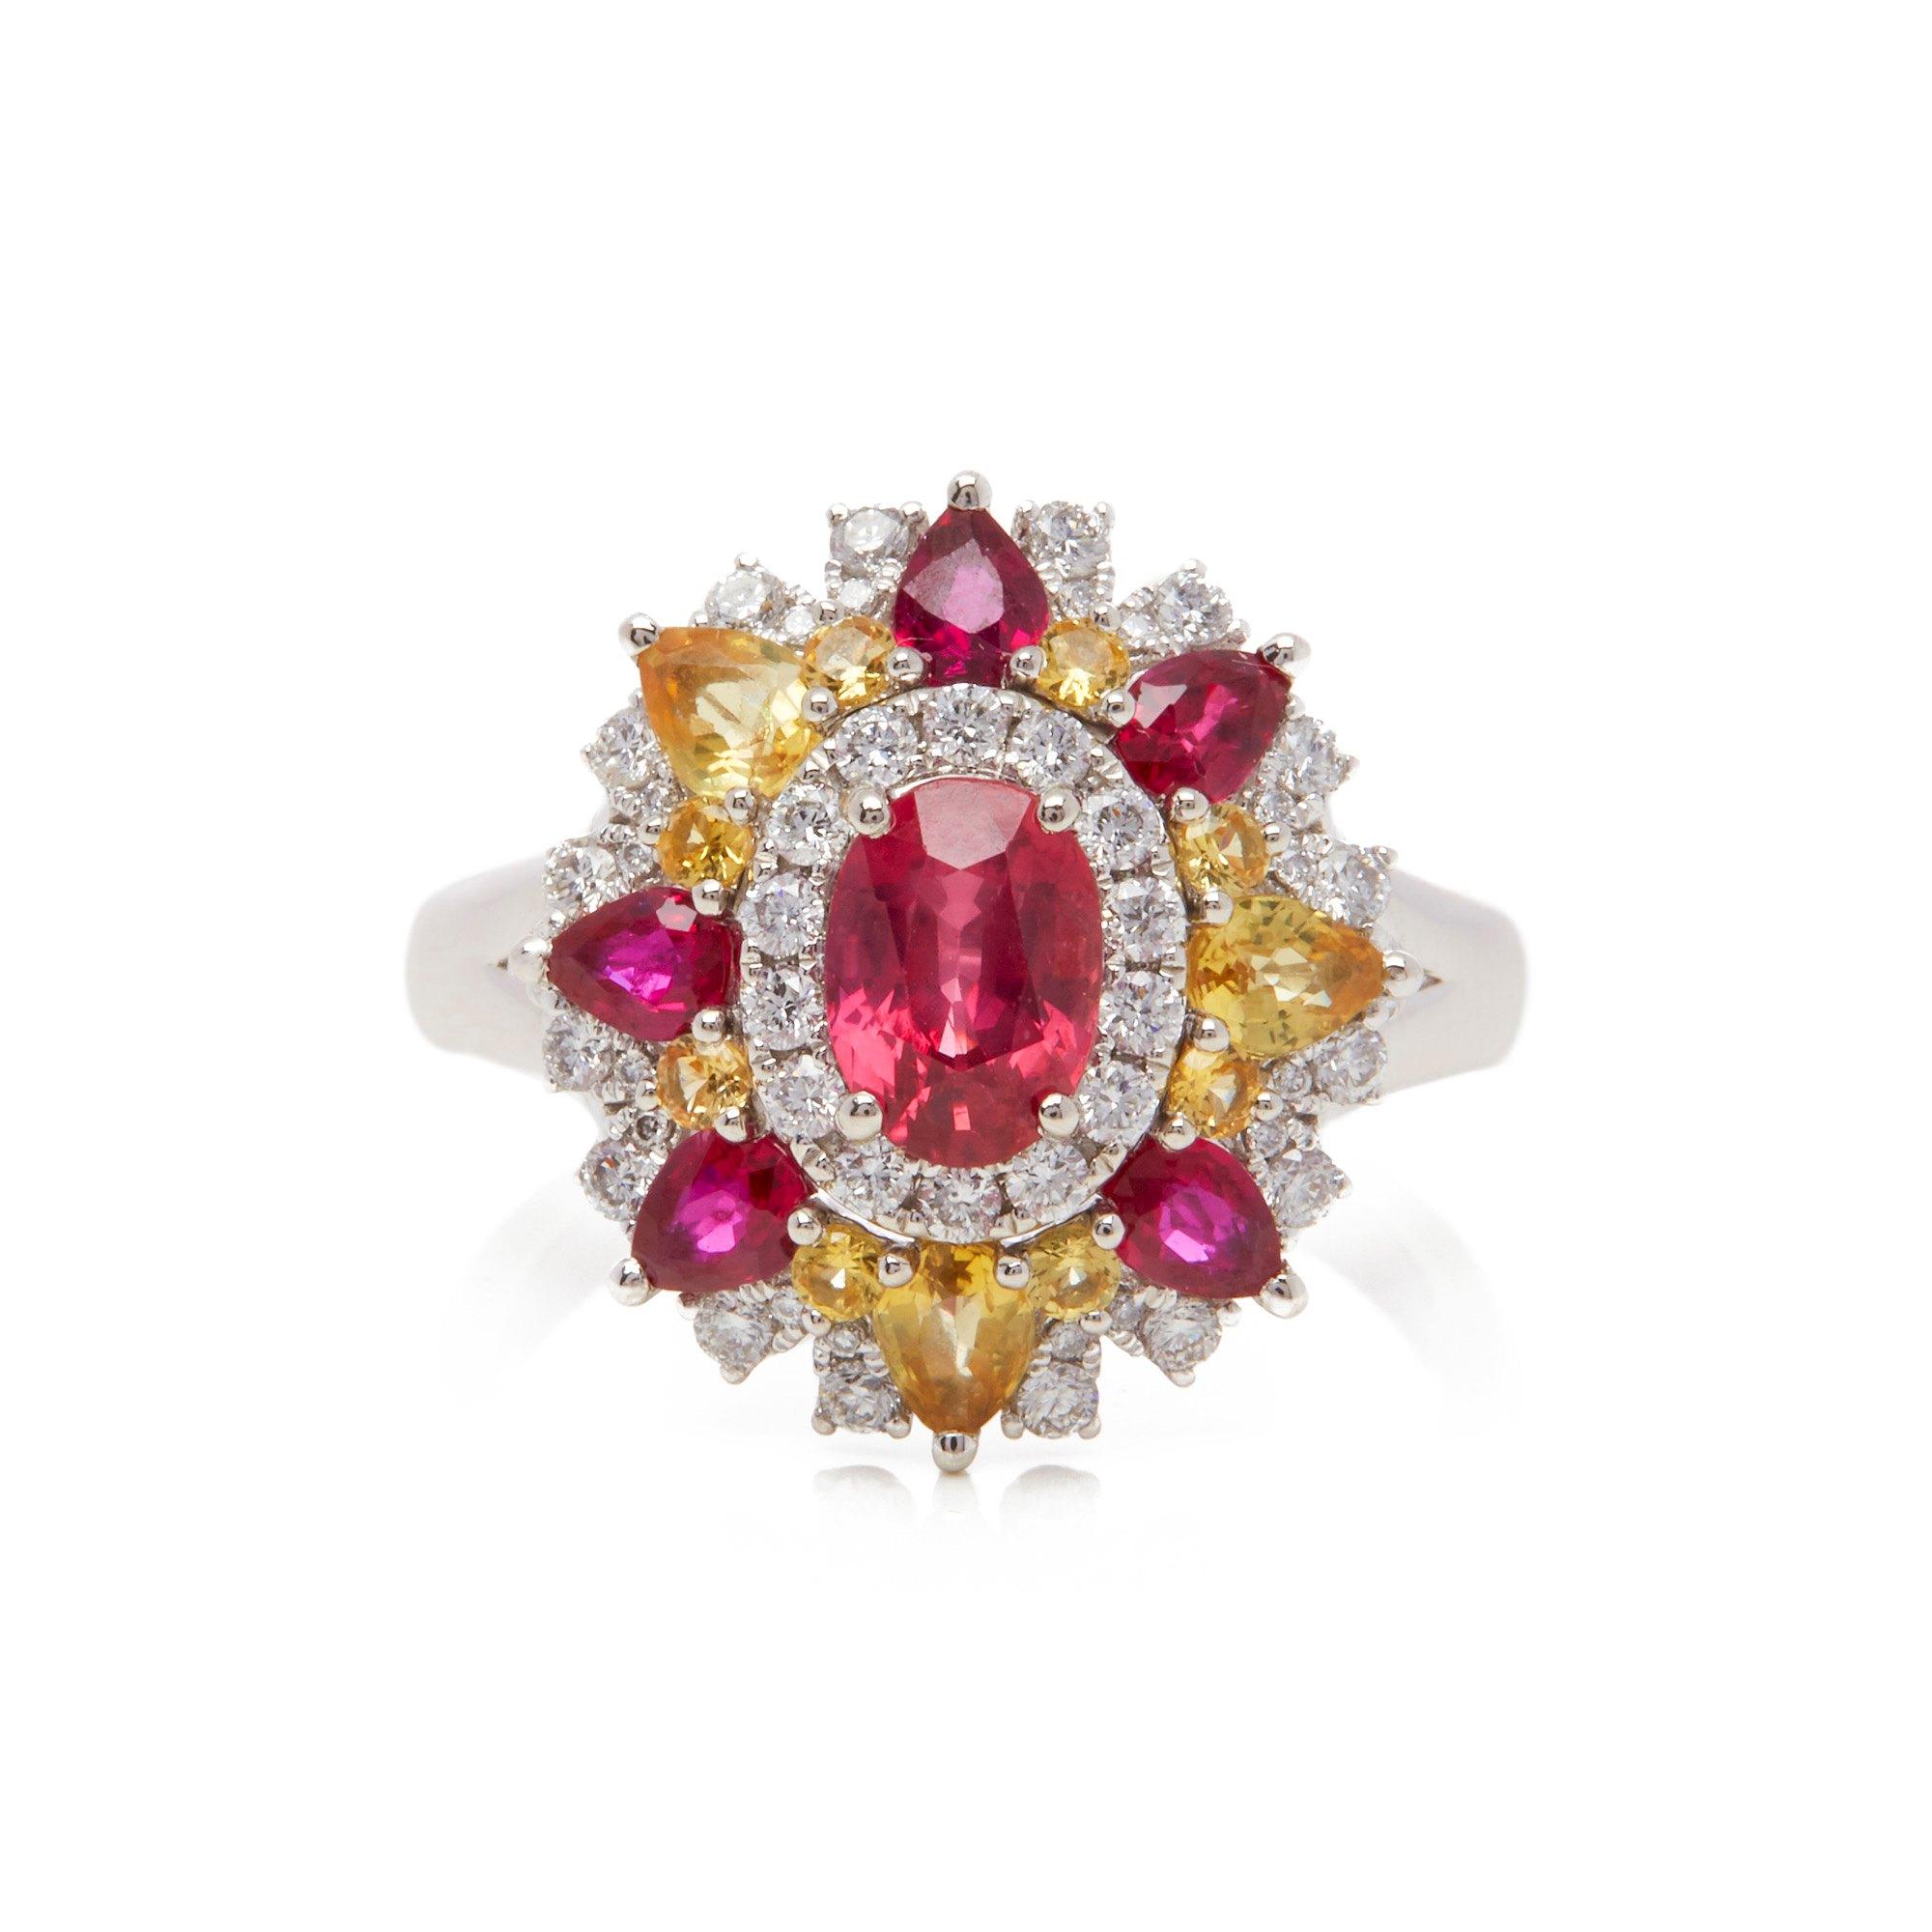 This ring designed by David Jerome is from his private collection and features one oval cut Ruby sourced in Mozambique totalling 1.07cts. Set with a mix of round brilliant cut Diamonds, Rubies and yellow Sapphires totalling 2.02cts combined. Mounted